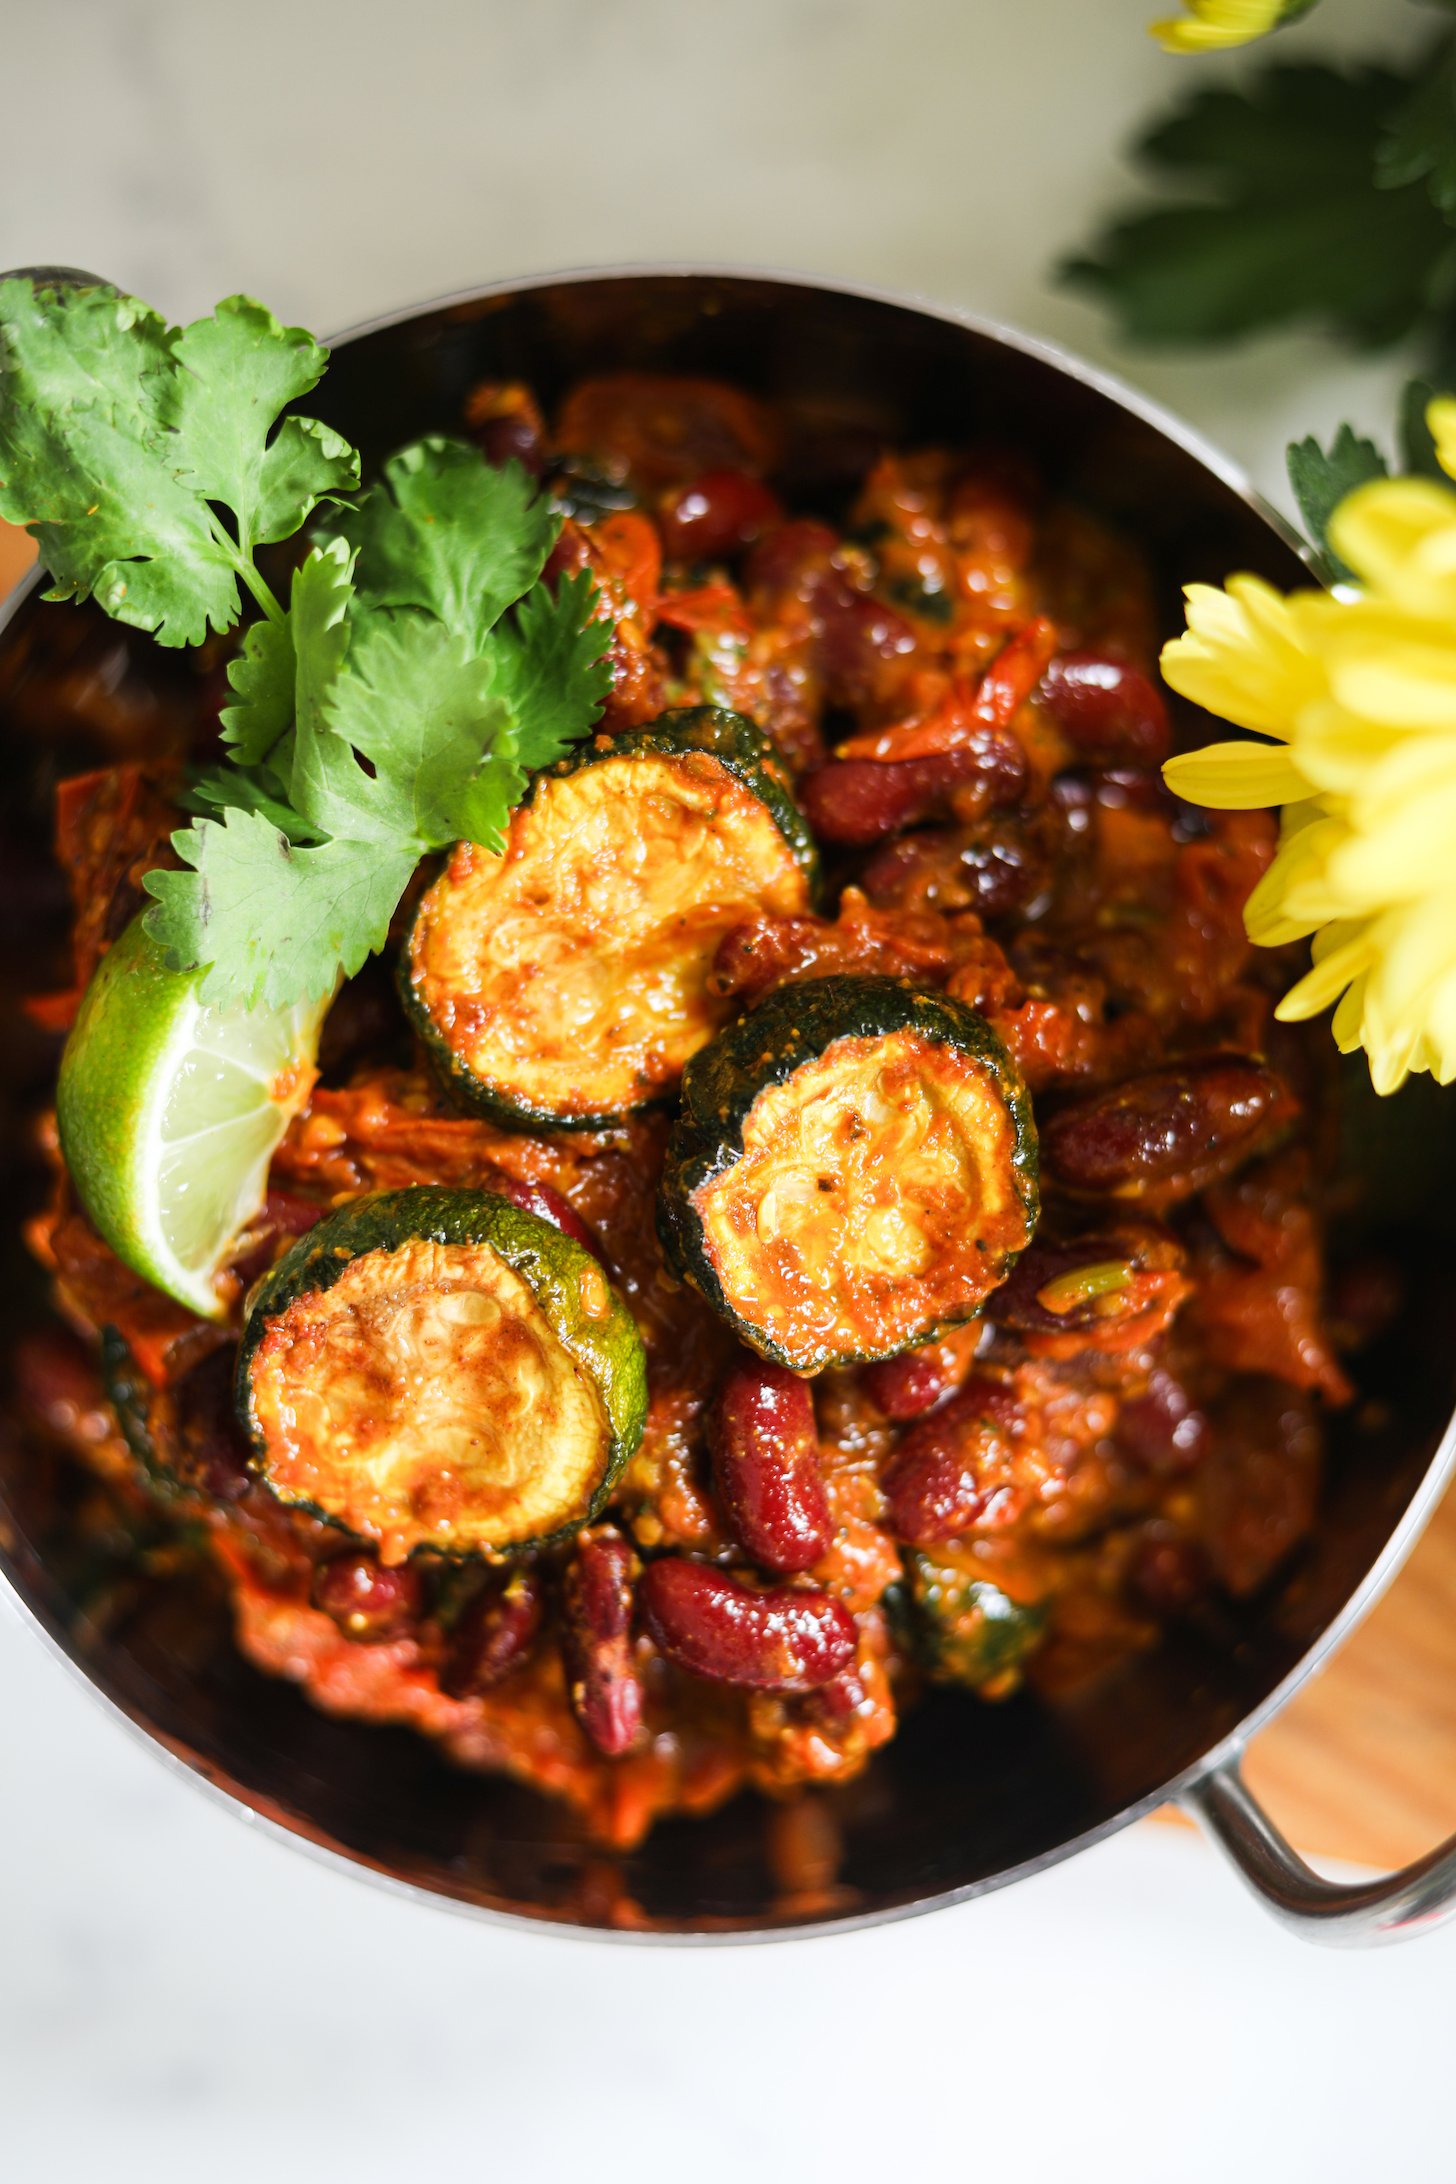 Flatlay image of a bowl of red kidney bean curry with zucchini topped with cilantro leaves and a wedge of lime.